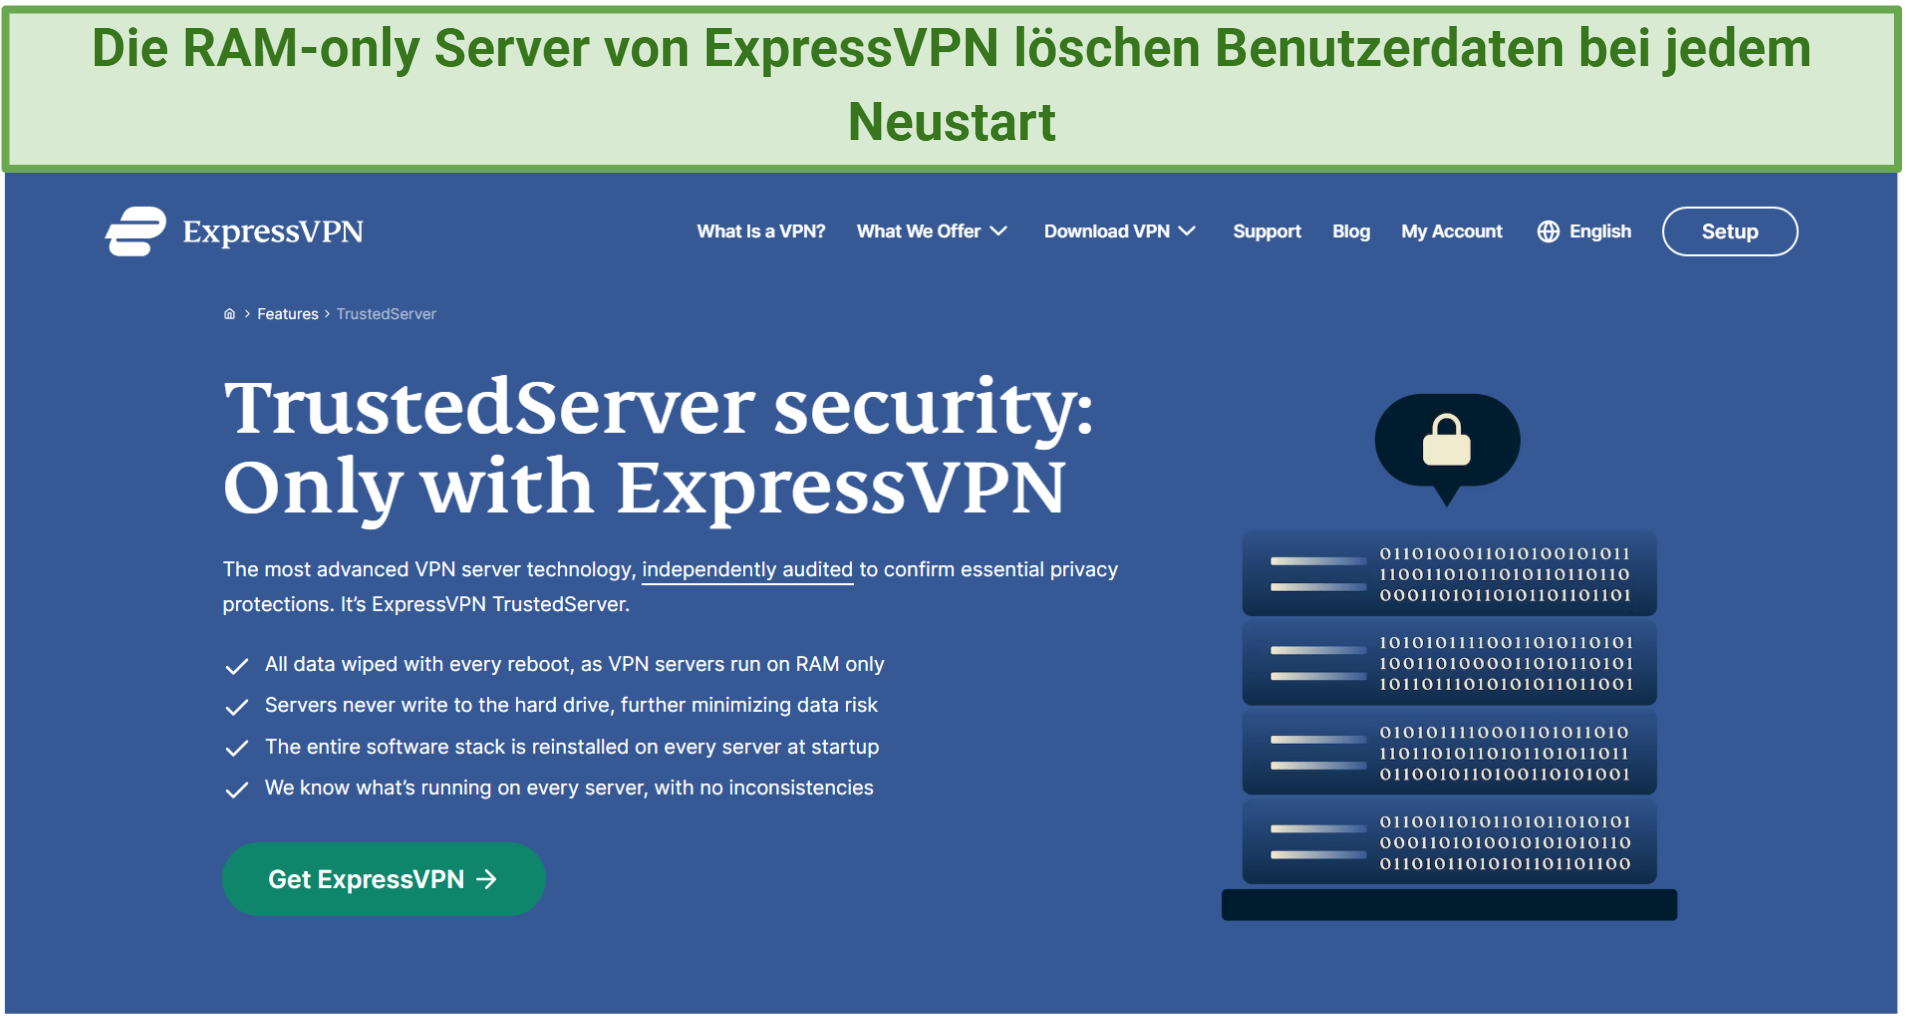 Screenshot from ExpressVPN's website explaining how its RAM servers protect user privacy